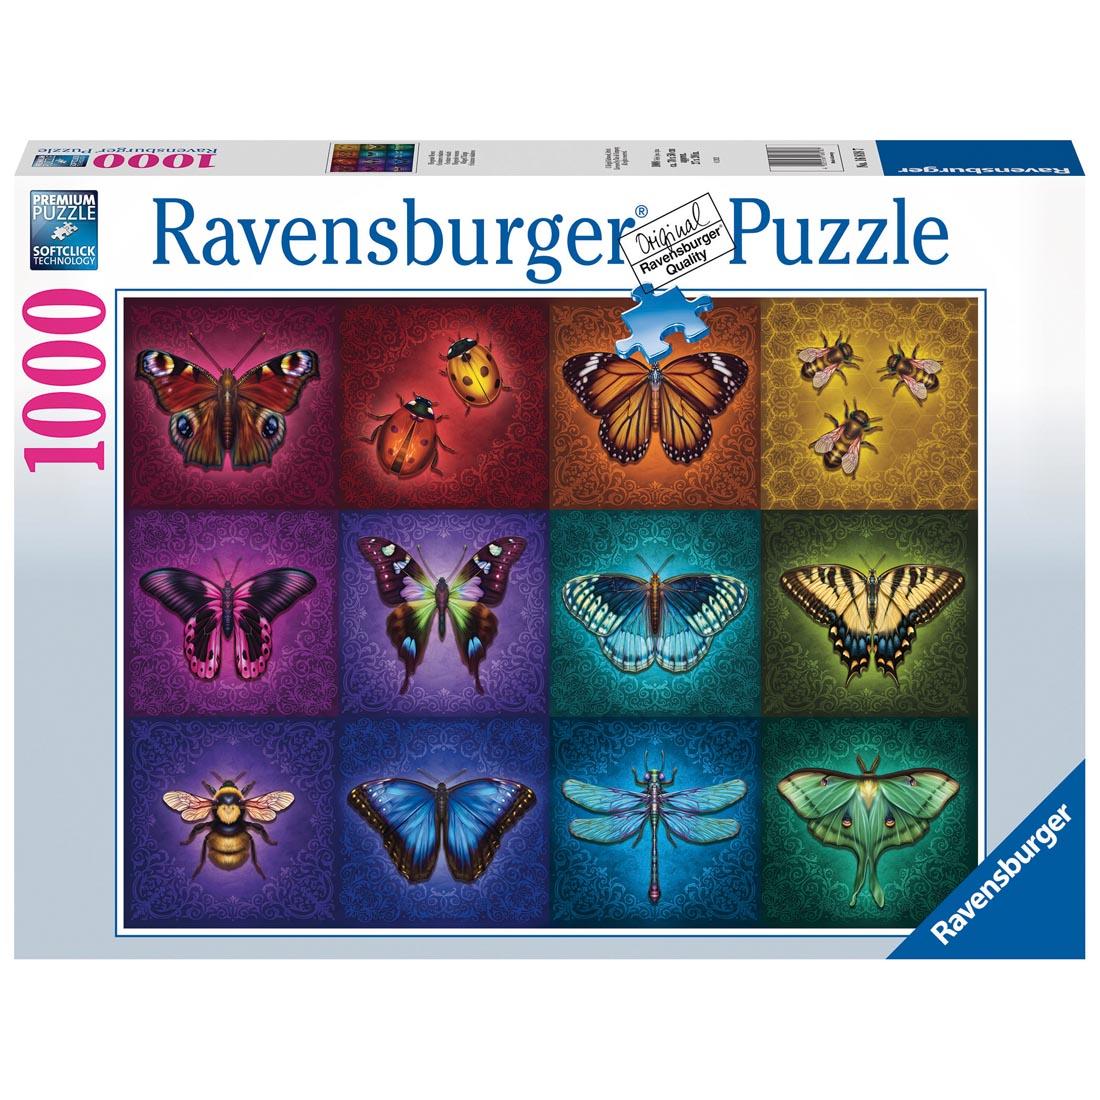 Winged Things Puzzle 1,000 Pieces by Ravensburger #16818